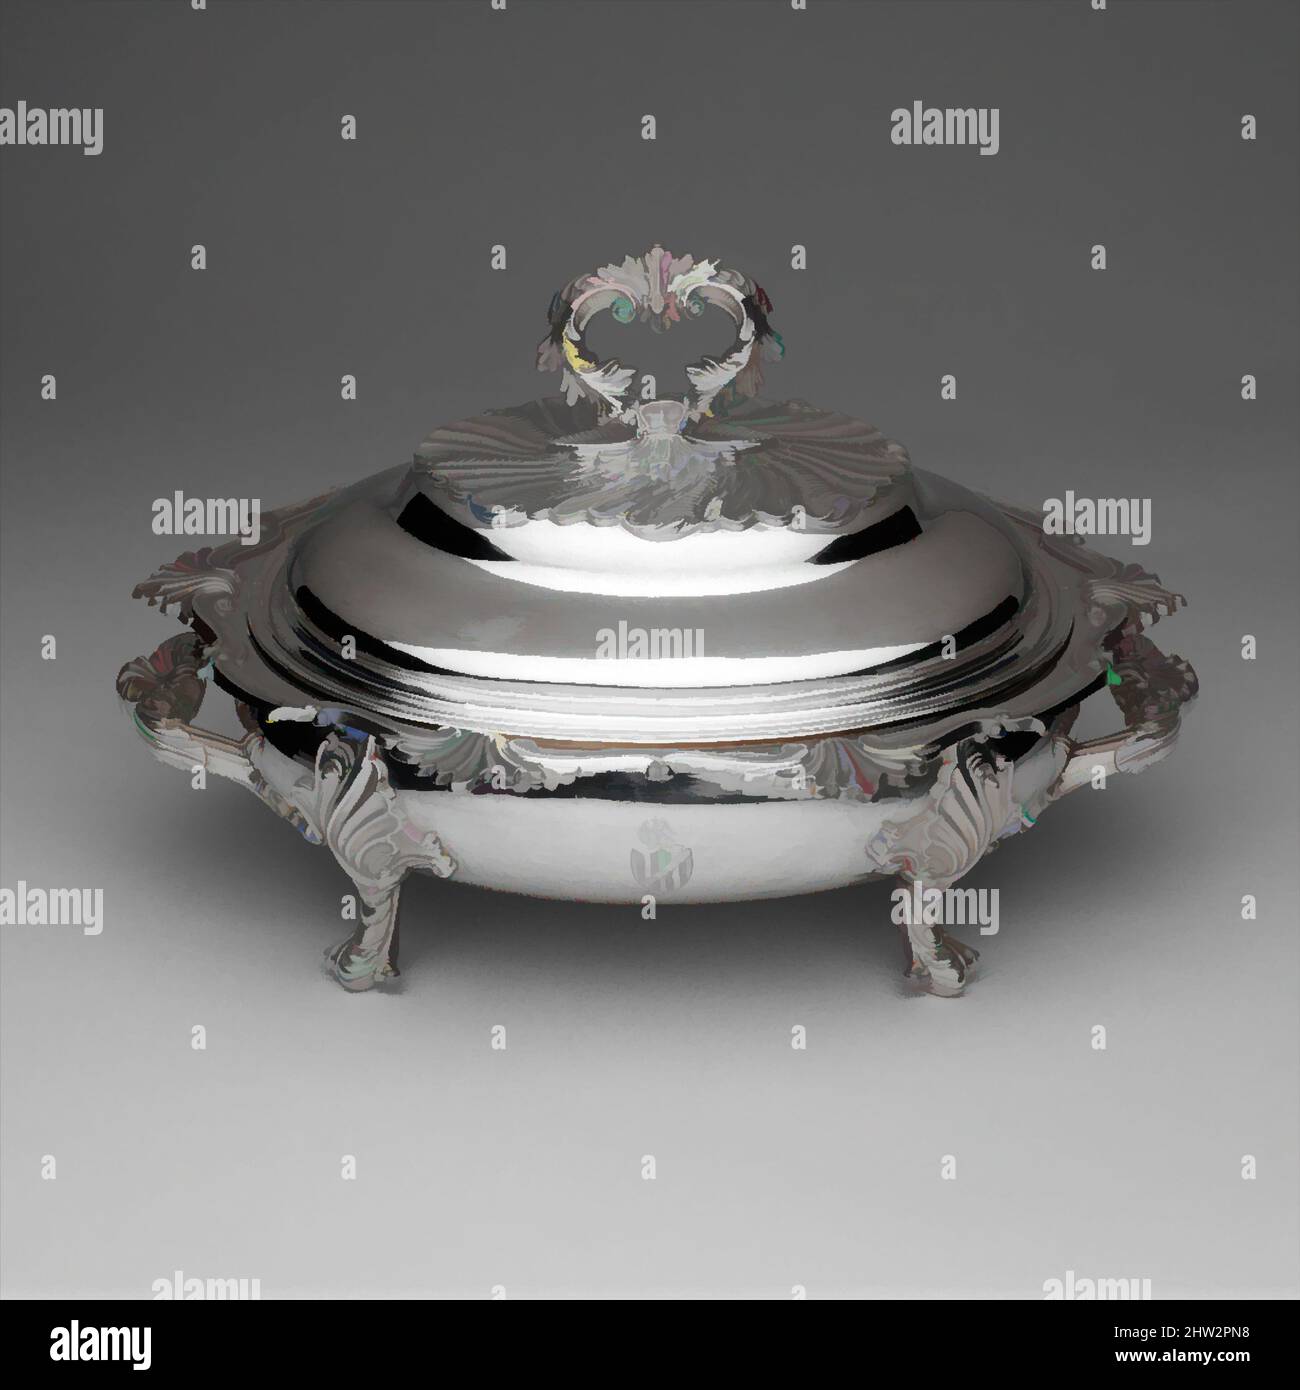 Art inspired by Entree Dish, ca. 1839, Made in Philadelphia, Pennsylvania, American, Silver, Overall: 7 7/8 x 12 5/8 x 10 1/4 in. (20 x 32.1 x 26 cm); 86 oz. 1 dwt. (2676.2 g), Silver, Taylor and Lawrie (active 1837–62), This covered entrée dish, a rare form in American silver, Classic works modernized by Artotop with a splash of modernity. Shapes, color and value, eye-catching visual impact on art. Emotions through freedom of artworks in a contemporary way. A timeless message pursuing a wildly creative new direction. Artists turning to the digital medium and creating the Artotop NFT Stock Photo